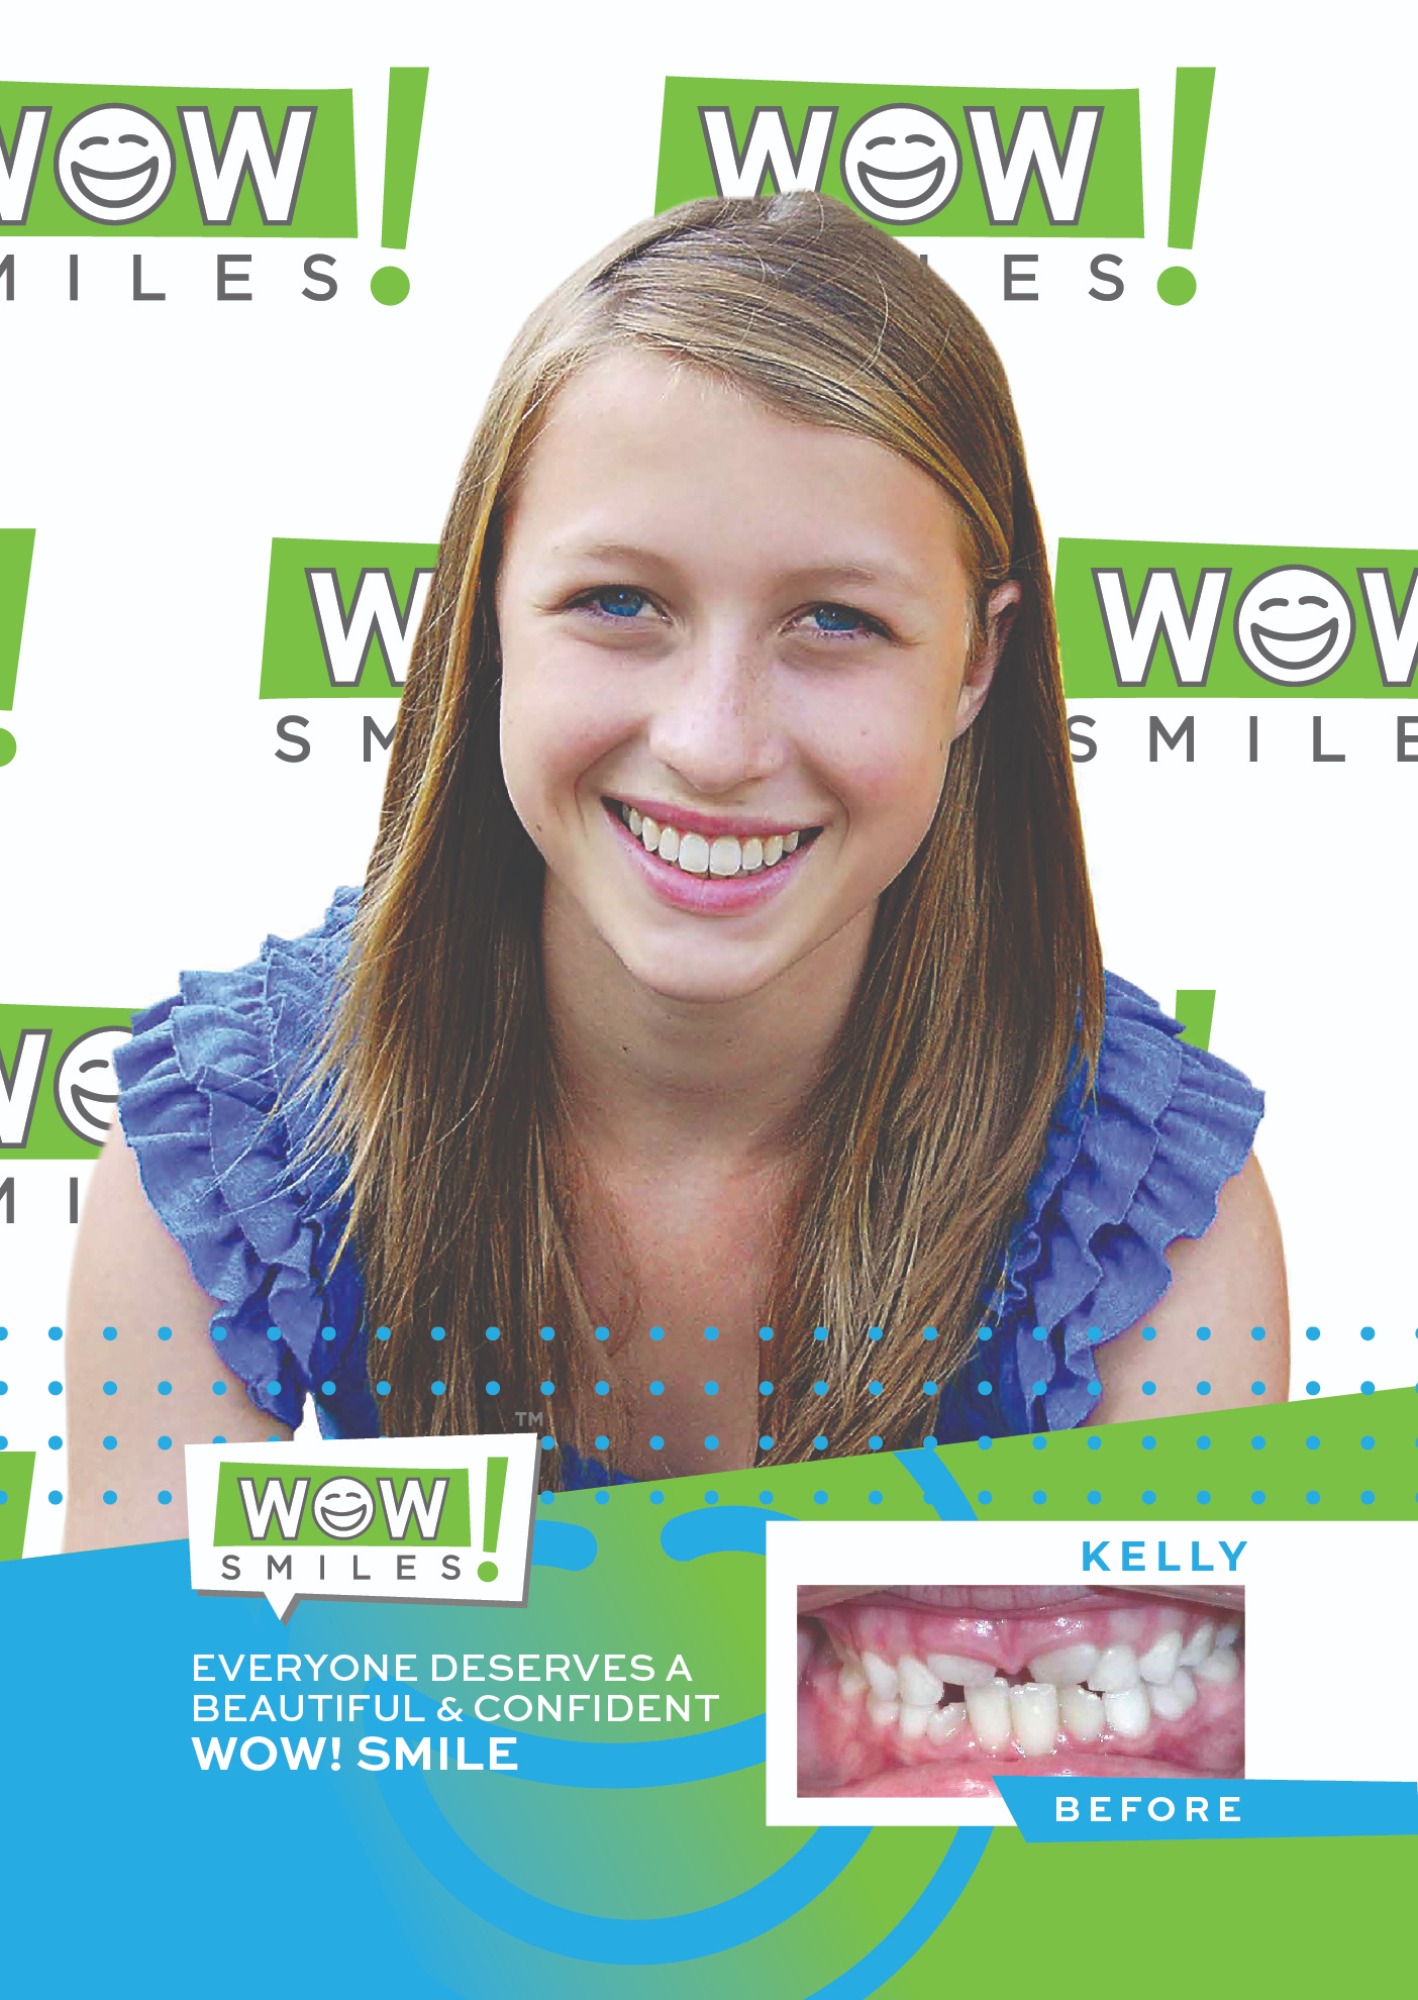 2022-05-10_Wow Smiles_Before and After Posters_Kelly_CC-01